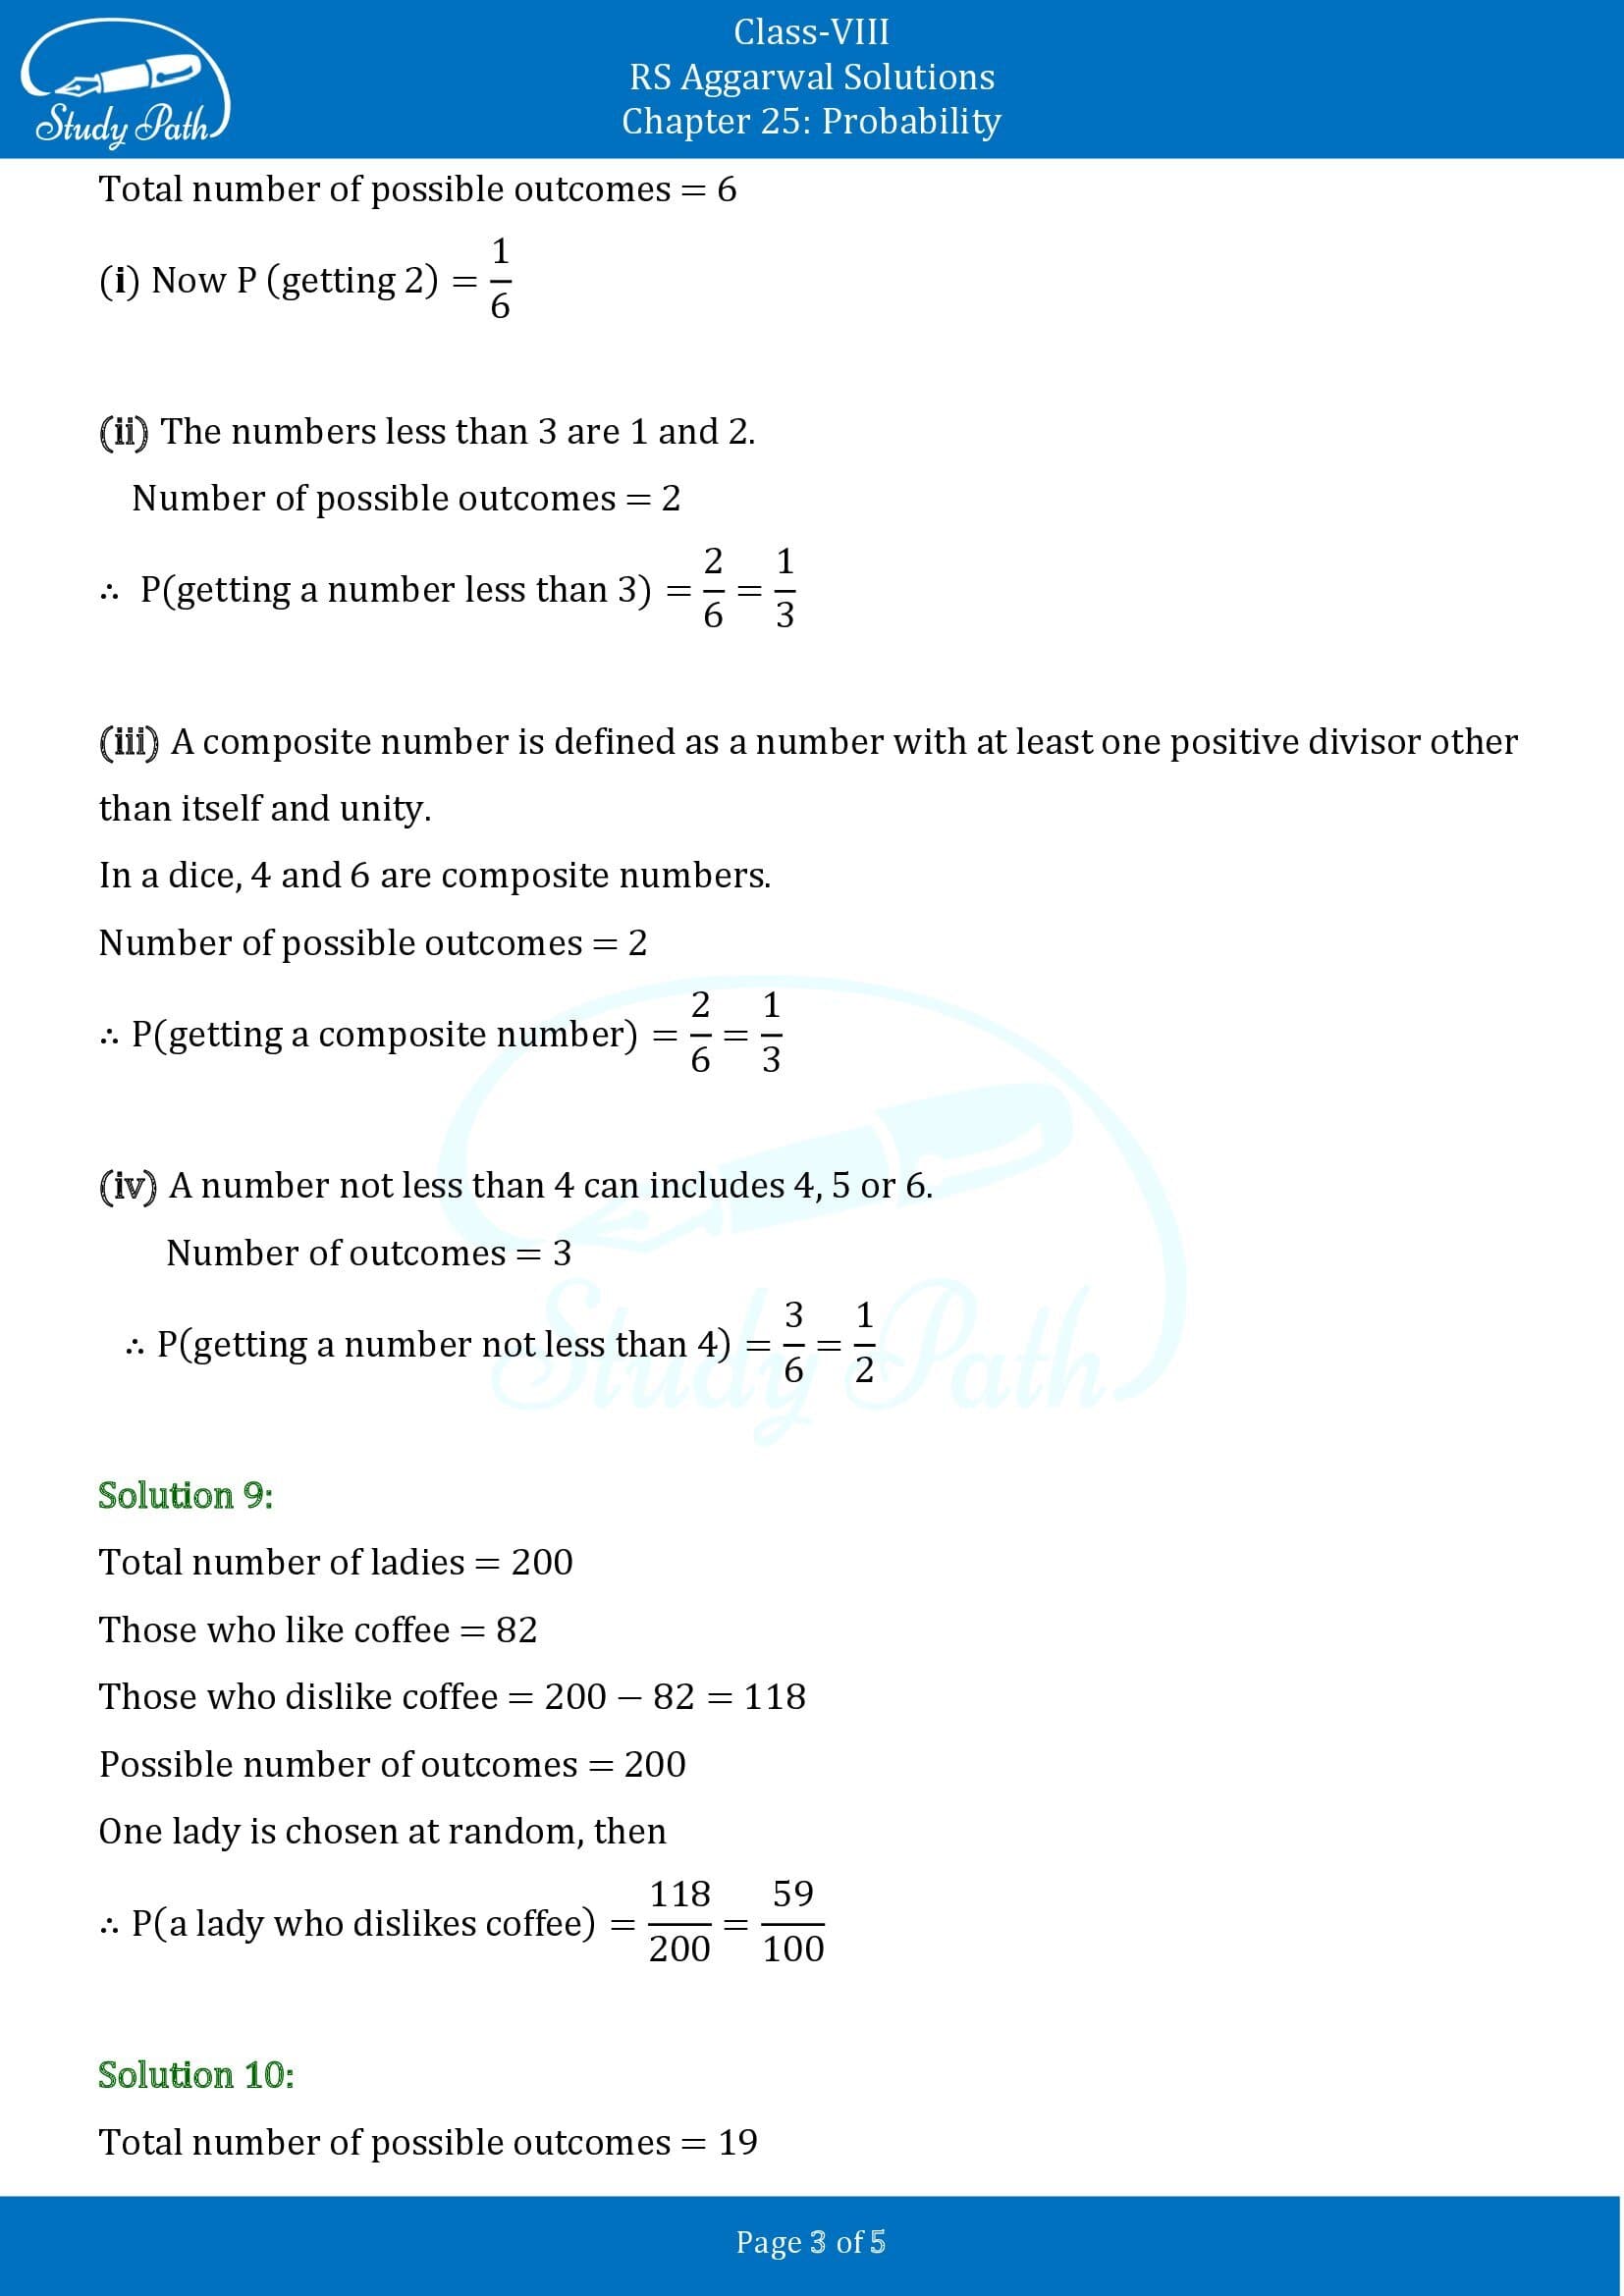 RS Aggarwal Solutions Class 8 Chapter 25 Probability Exercise 25A 00003